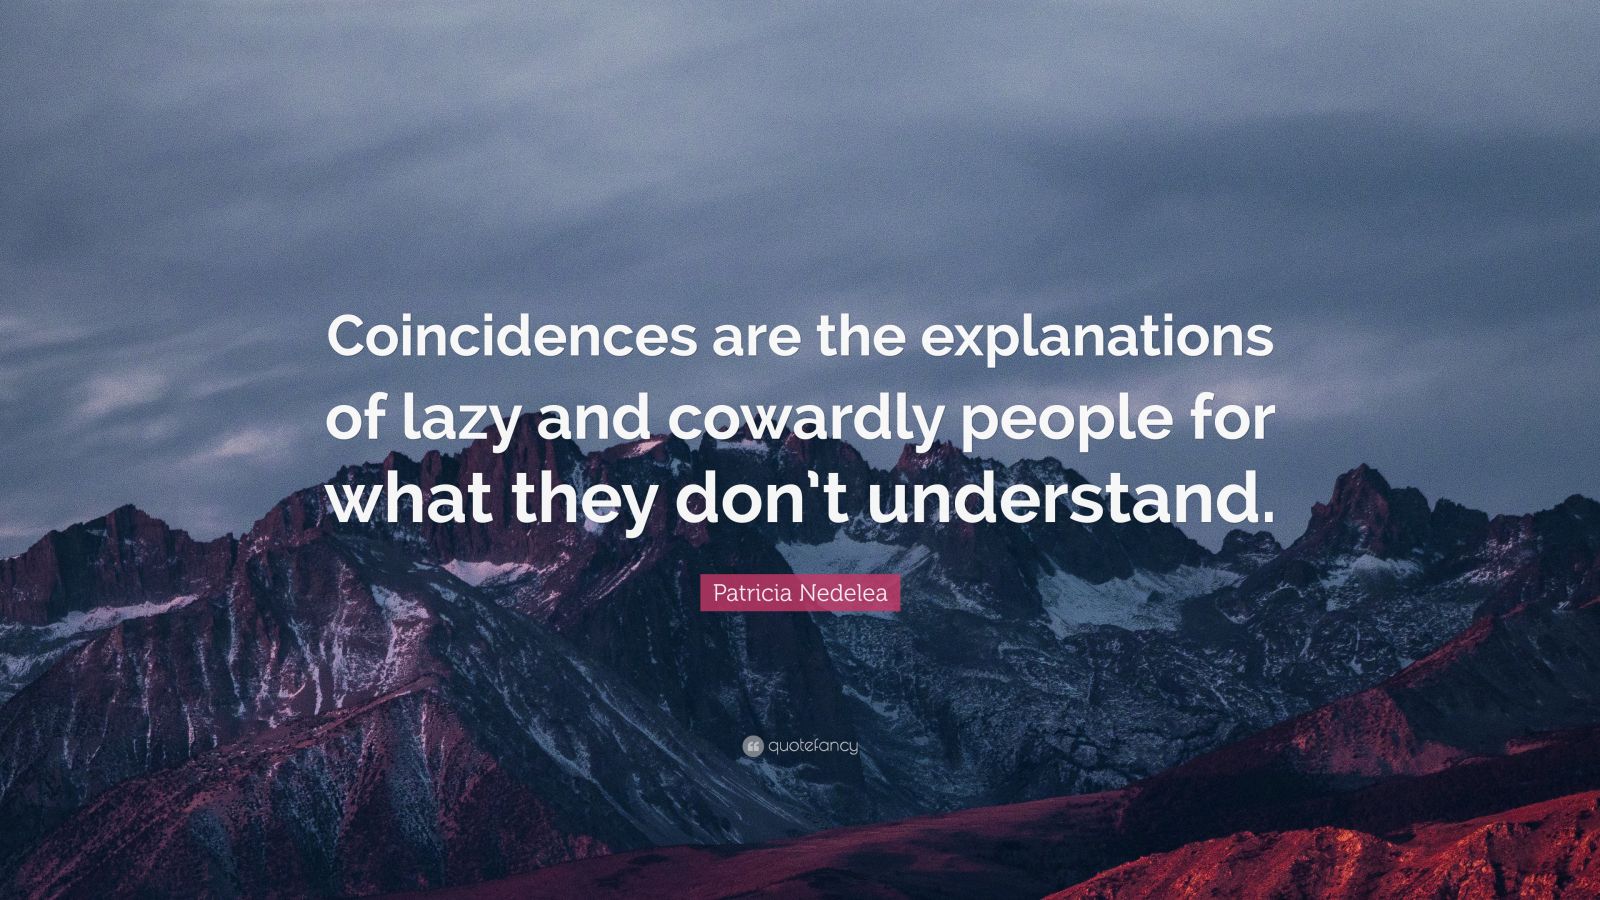 Patricia Nedelea Quote: “Coincidences are the explanations of lazy and ...